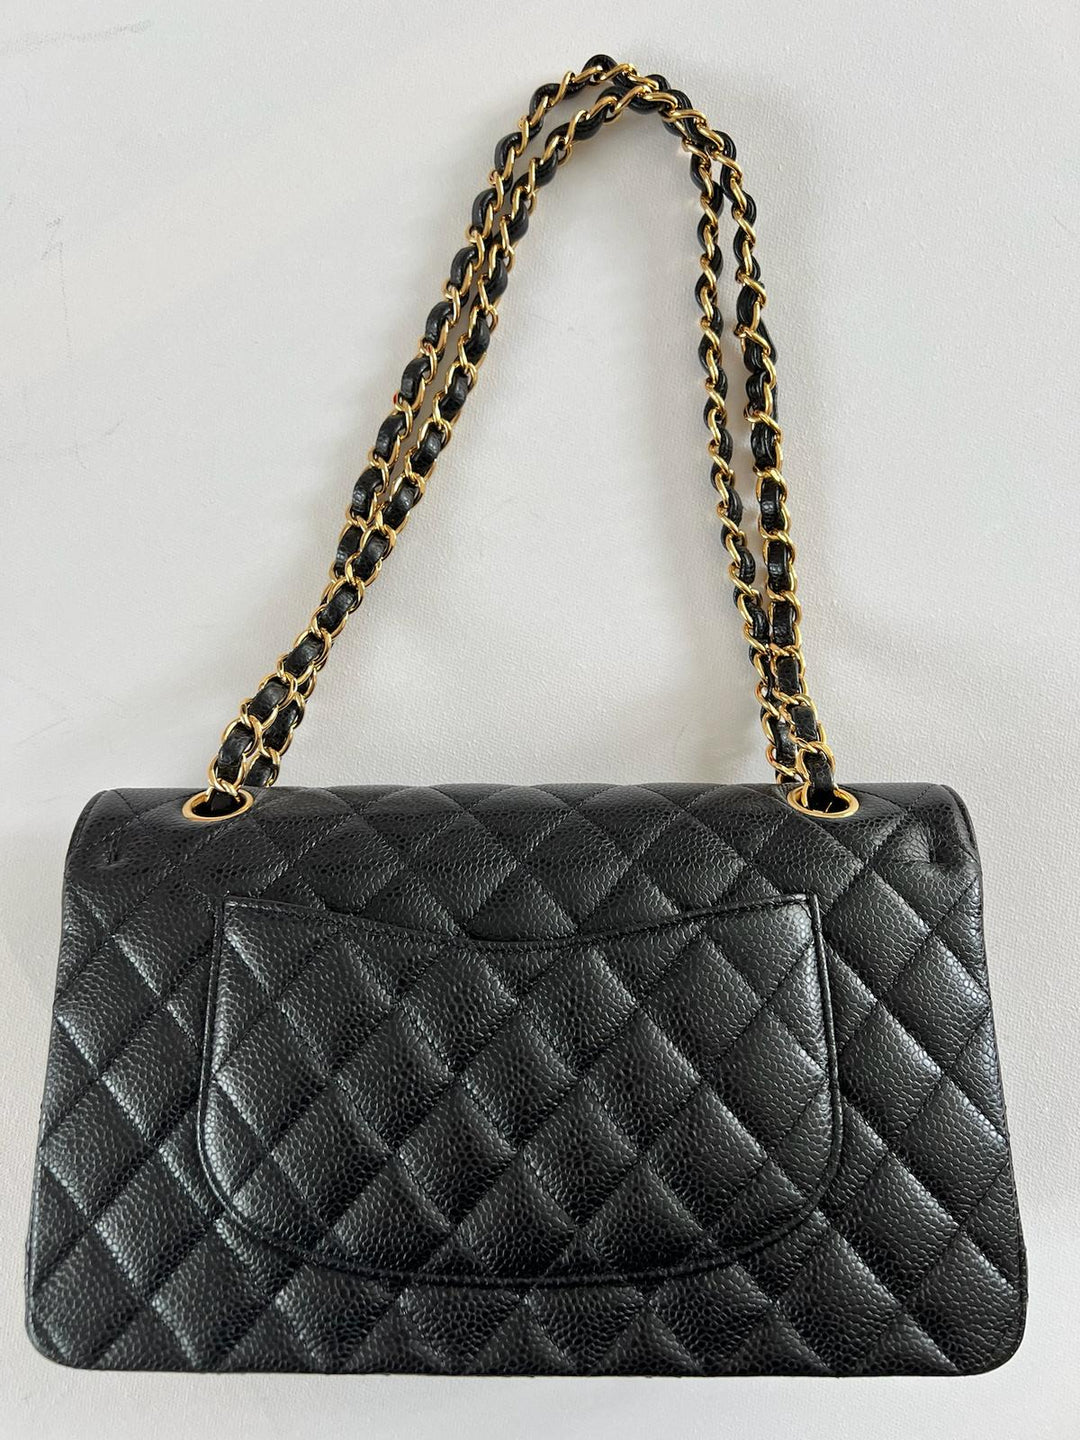 Chanel Classic Double Flap Medium in Black Caviar Leather with Gold Hardware 2021